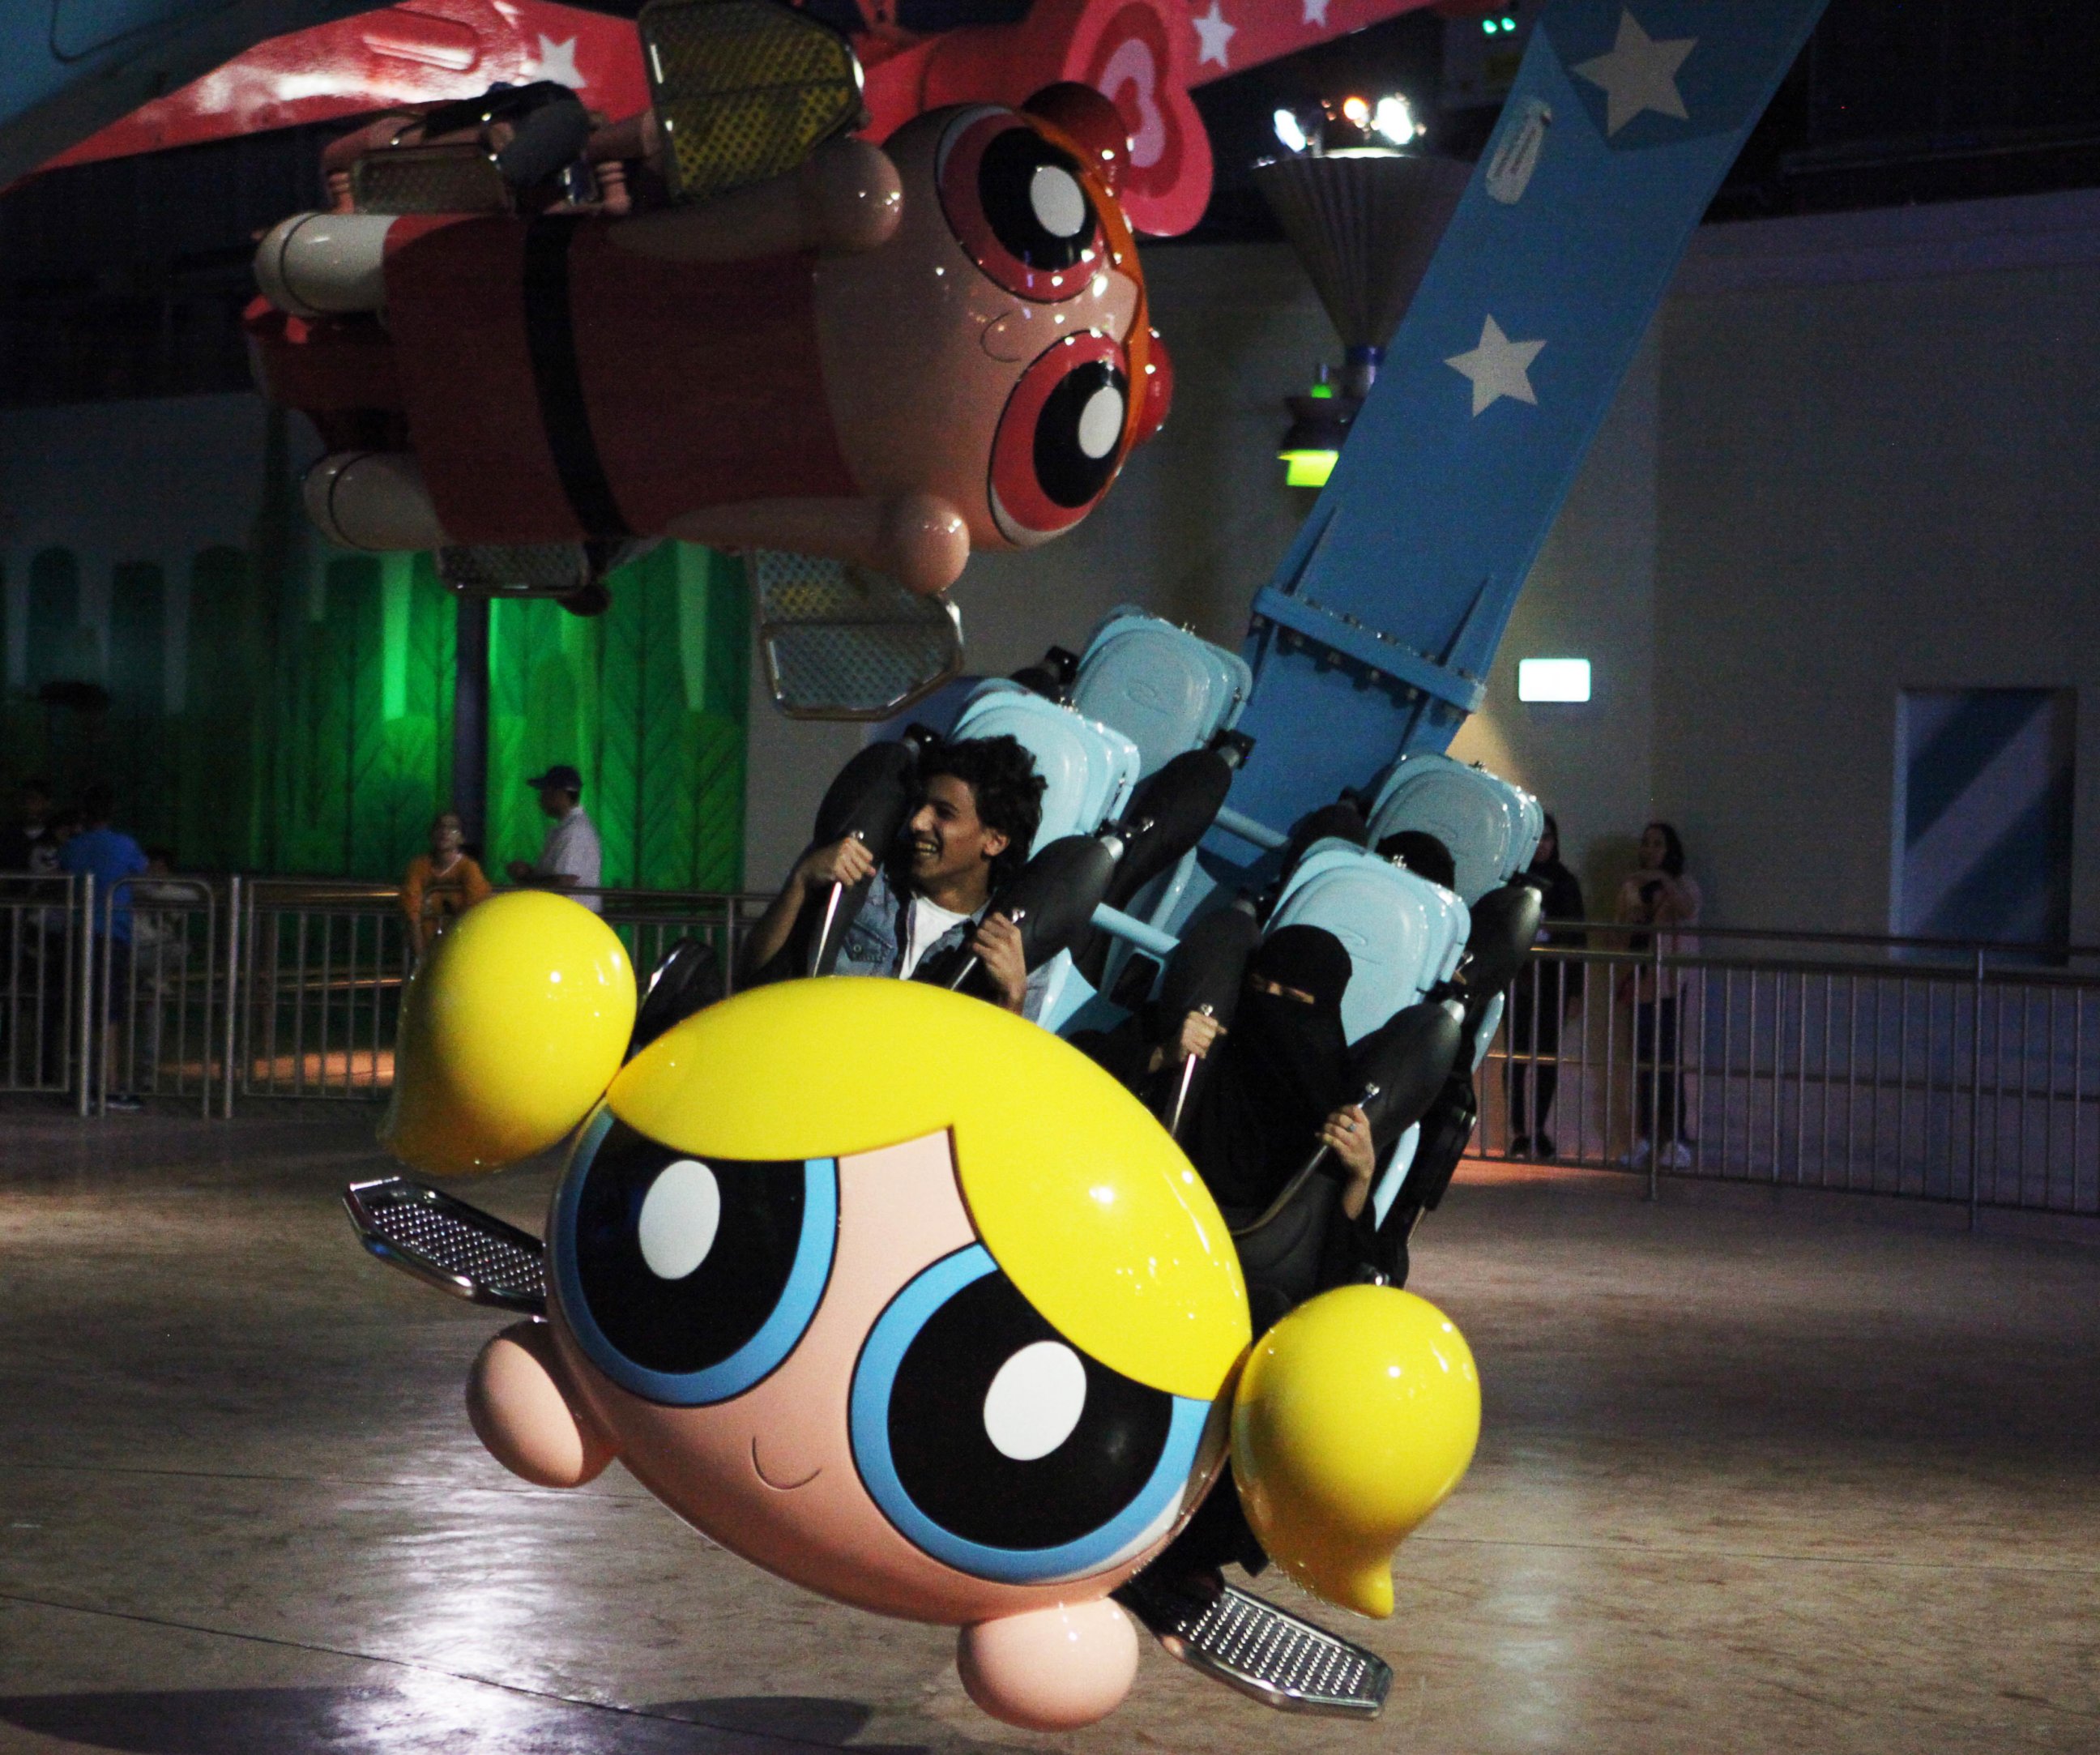 PHOTO:People shout as they experience the Powerpuff Girls - Mojo Jojo's Robot Rampage ride at the IMG Worlds of Adventure amusement park in Dubai, United Arab Emirates.